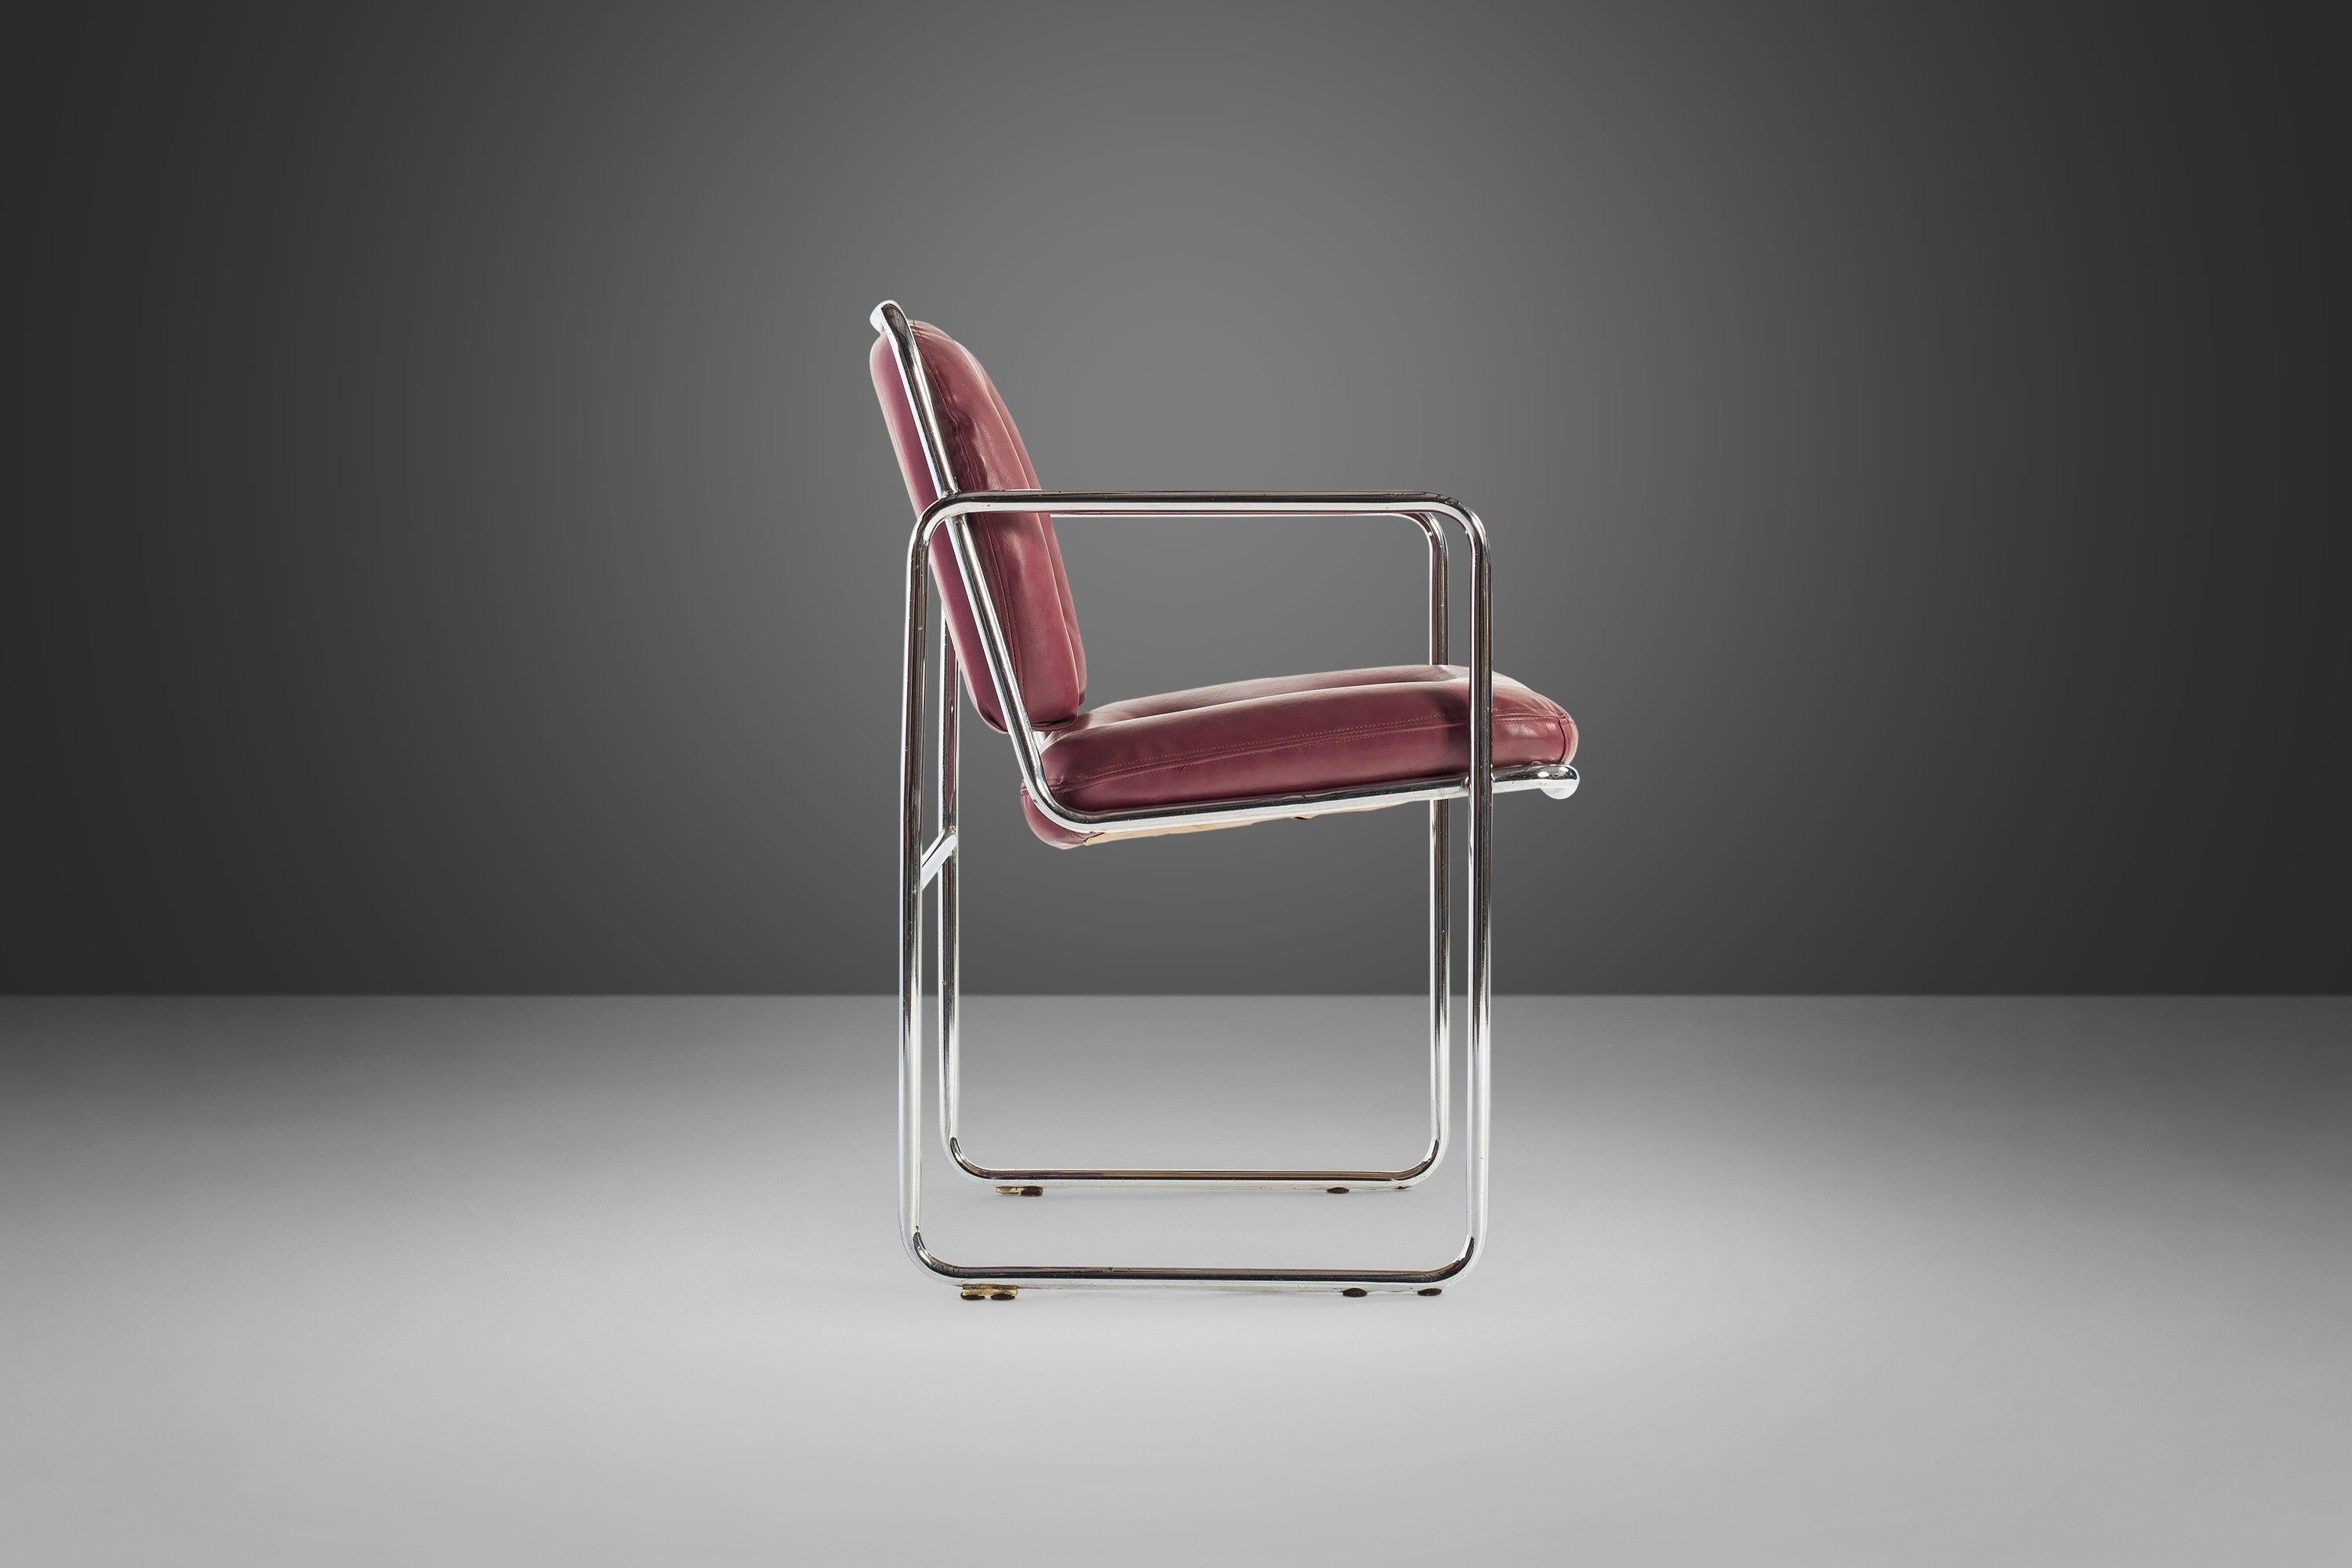 MCM Tubular Chrome Lounge Chairs by Chromcraft with Rich Oxblood Seats, c. 1960s In Good Condition For Sale In Deland, FL